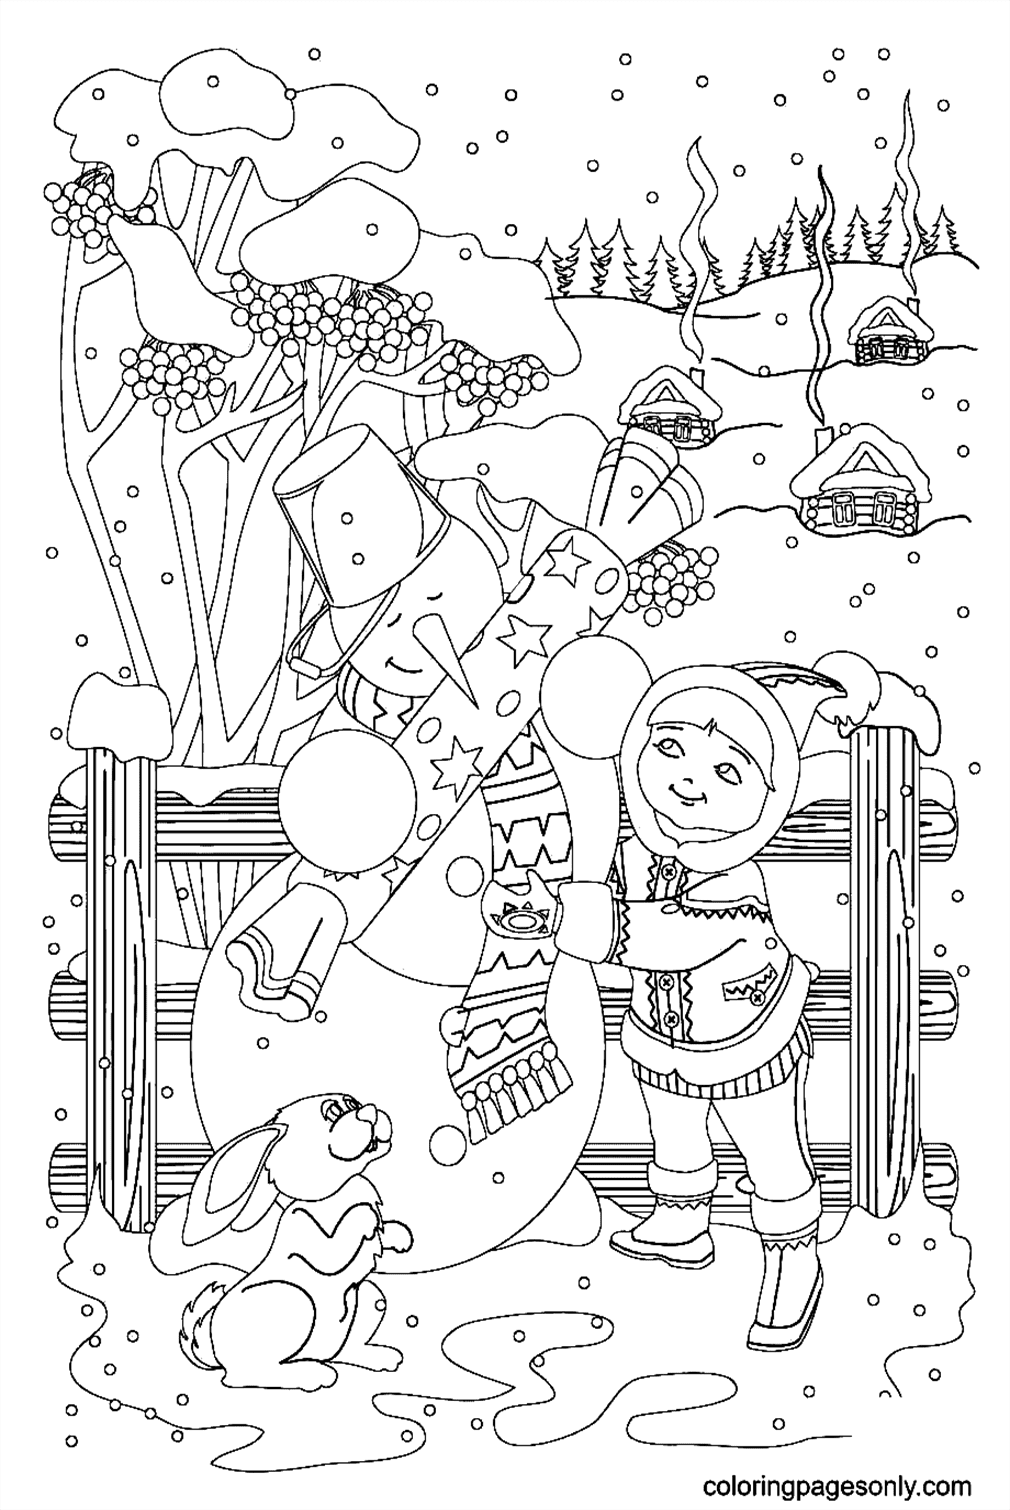 A Little Girl Is Giving A Present To A Snowman Coloring Page